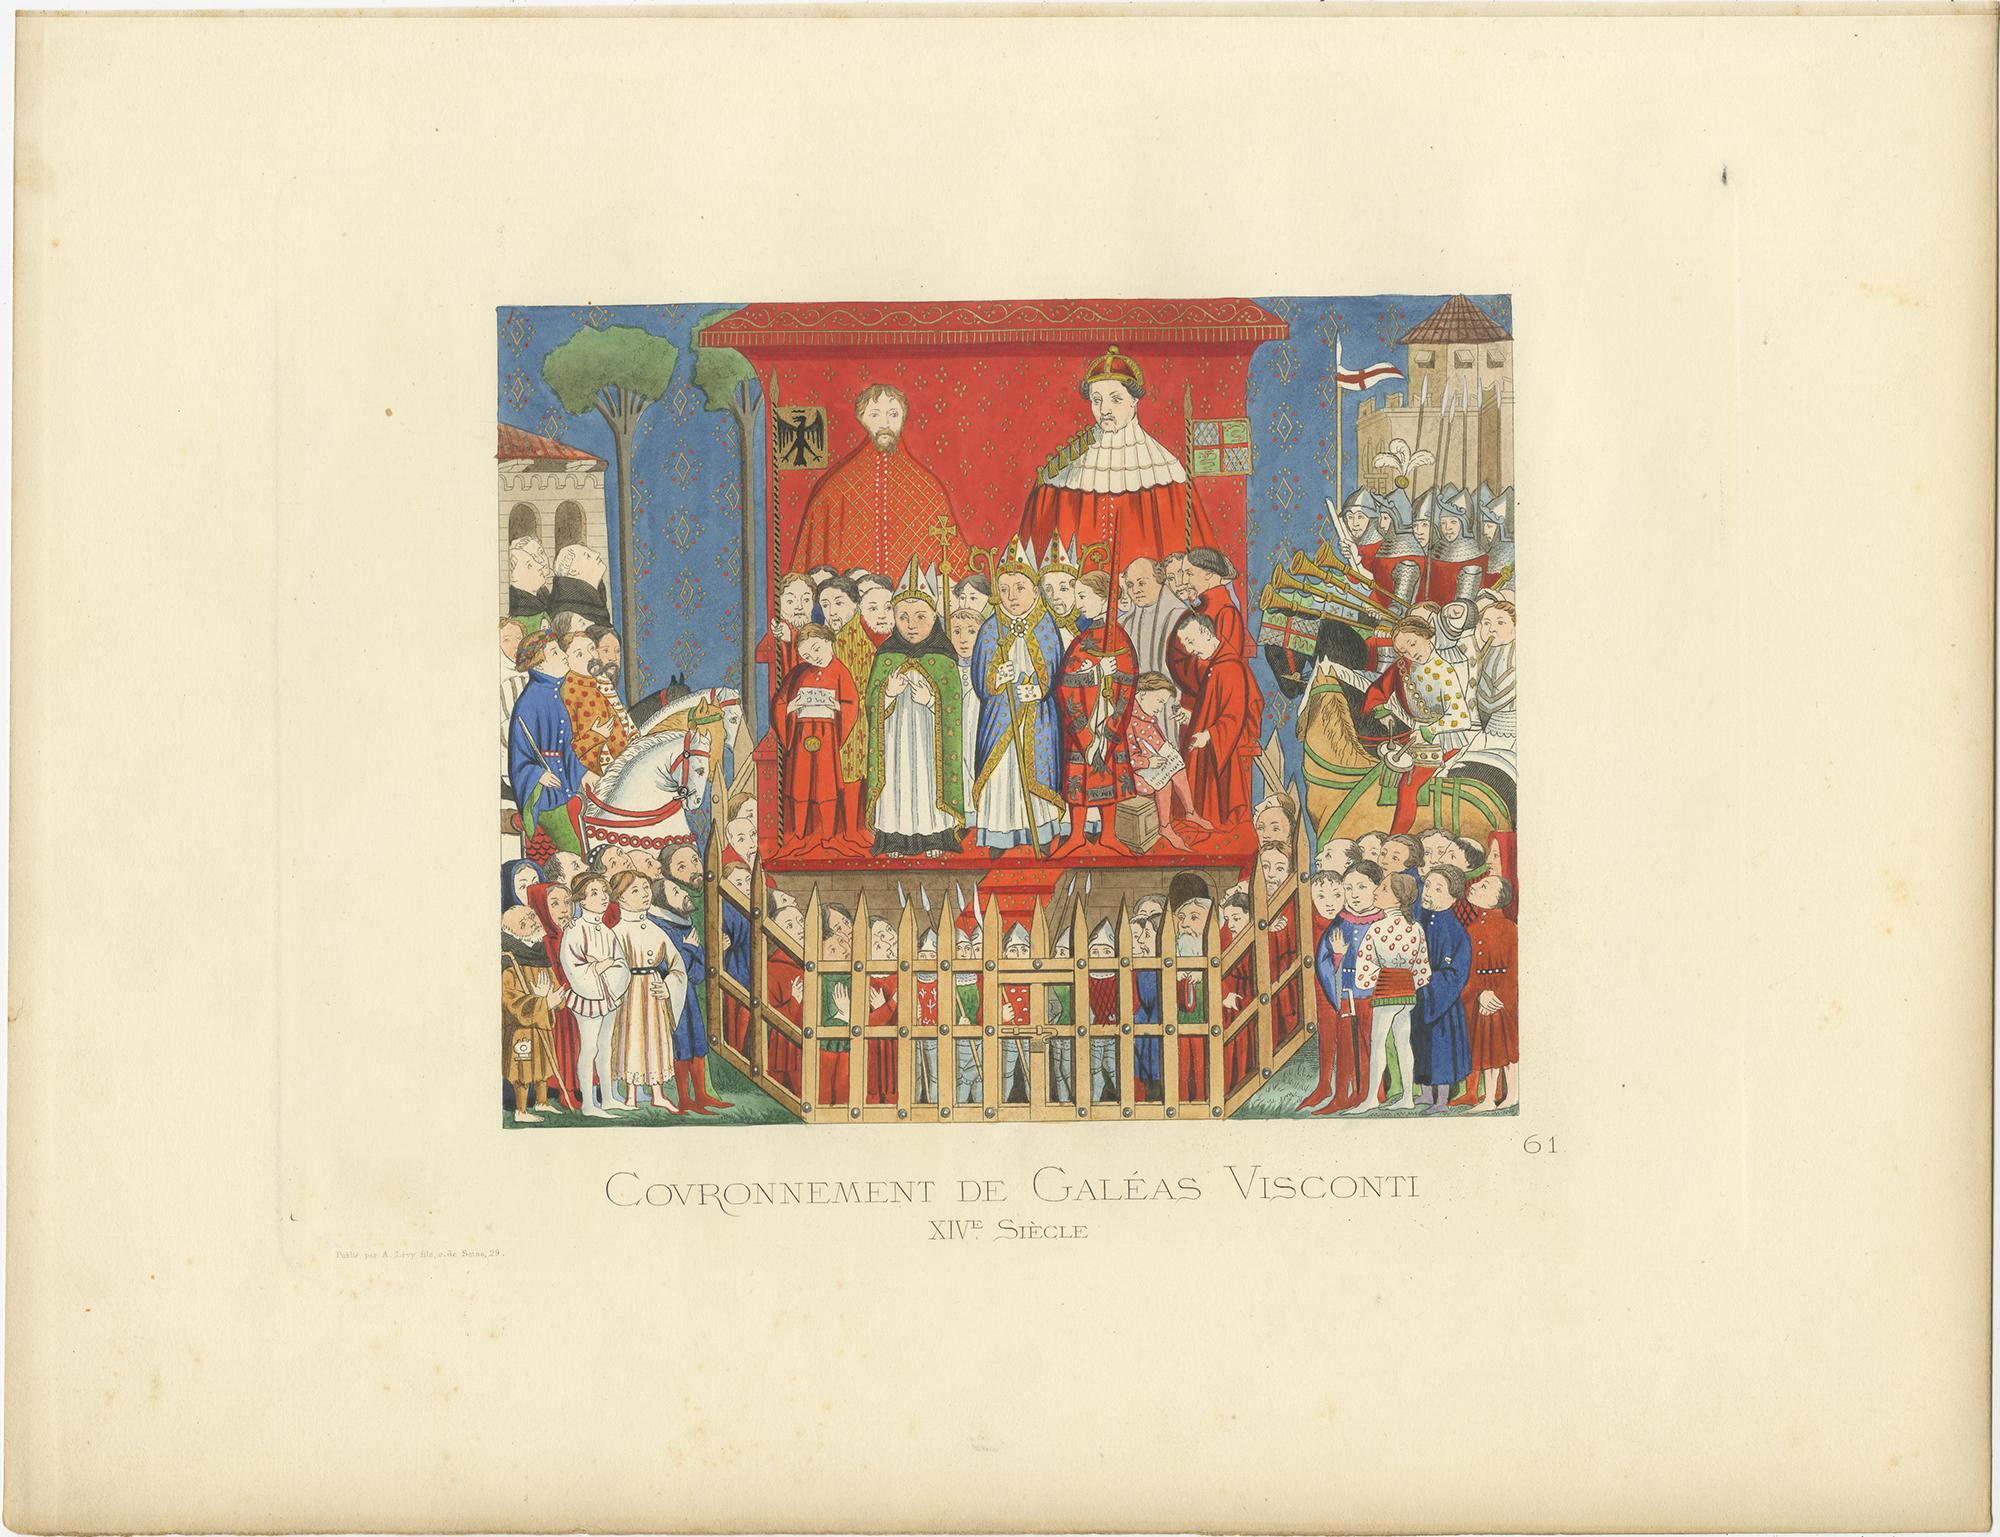 Antique print titled ‘Couronnement de Galéas Visconti, XIVe Siecle.’ Original antique print of the coronation of Gian Galeazzo Visconti, 14th century. Visconti (1351 – 1402) was a Duke of Milan, Italy. This print originates from 'Costumes